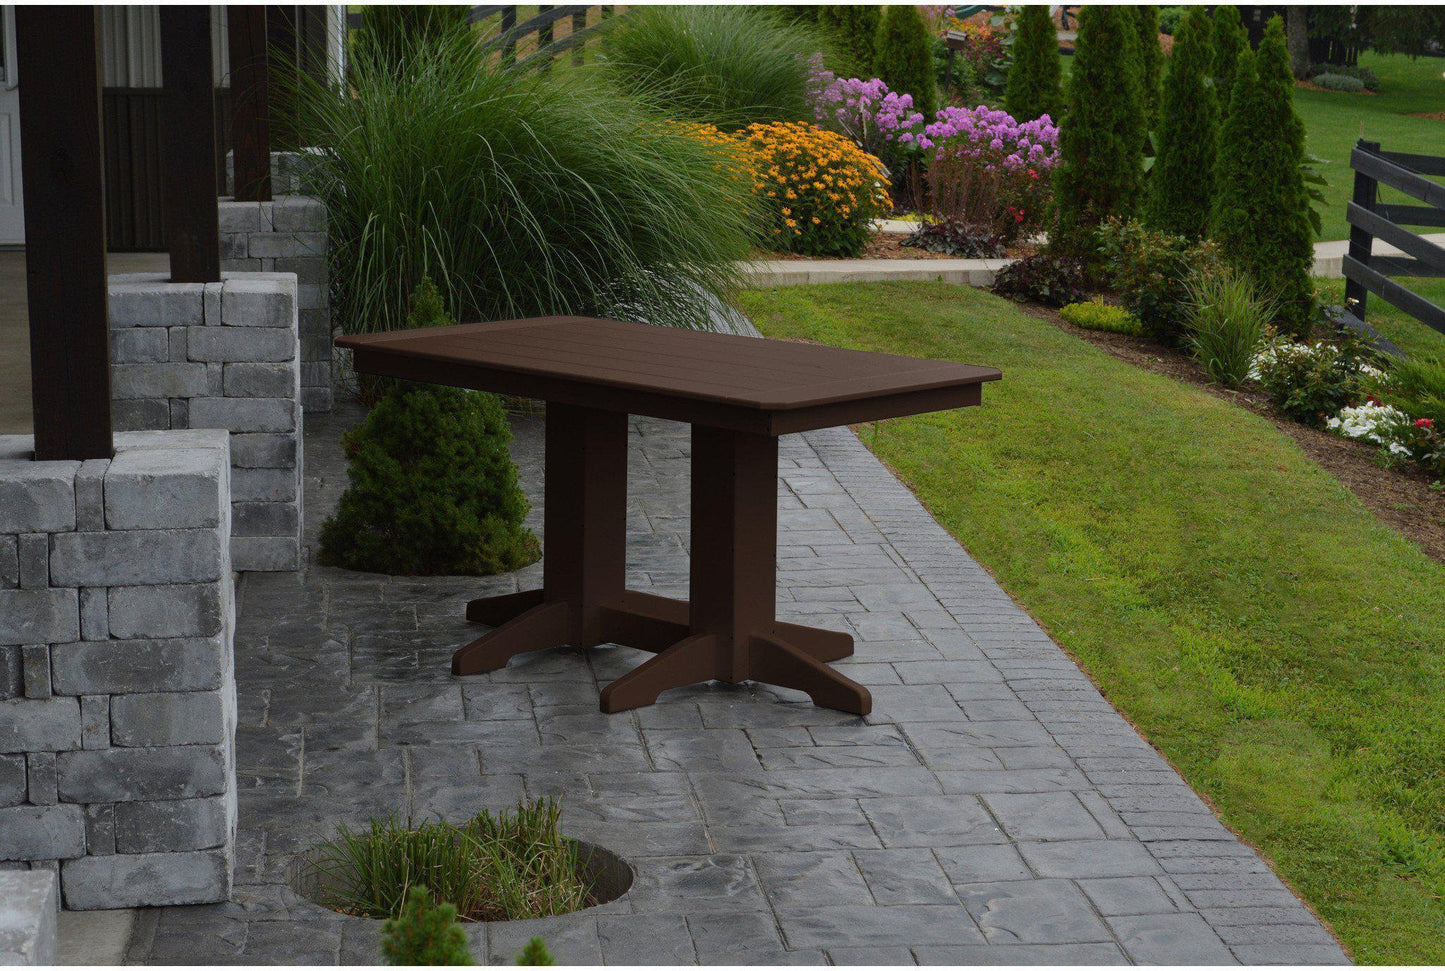 A&L Furniture Company Recycled Plastic 5' Dining Table - Tudor Brown